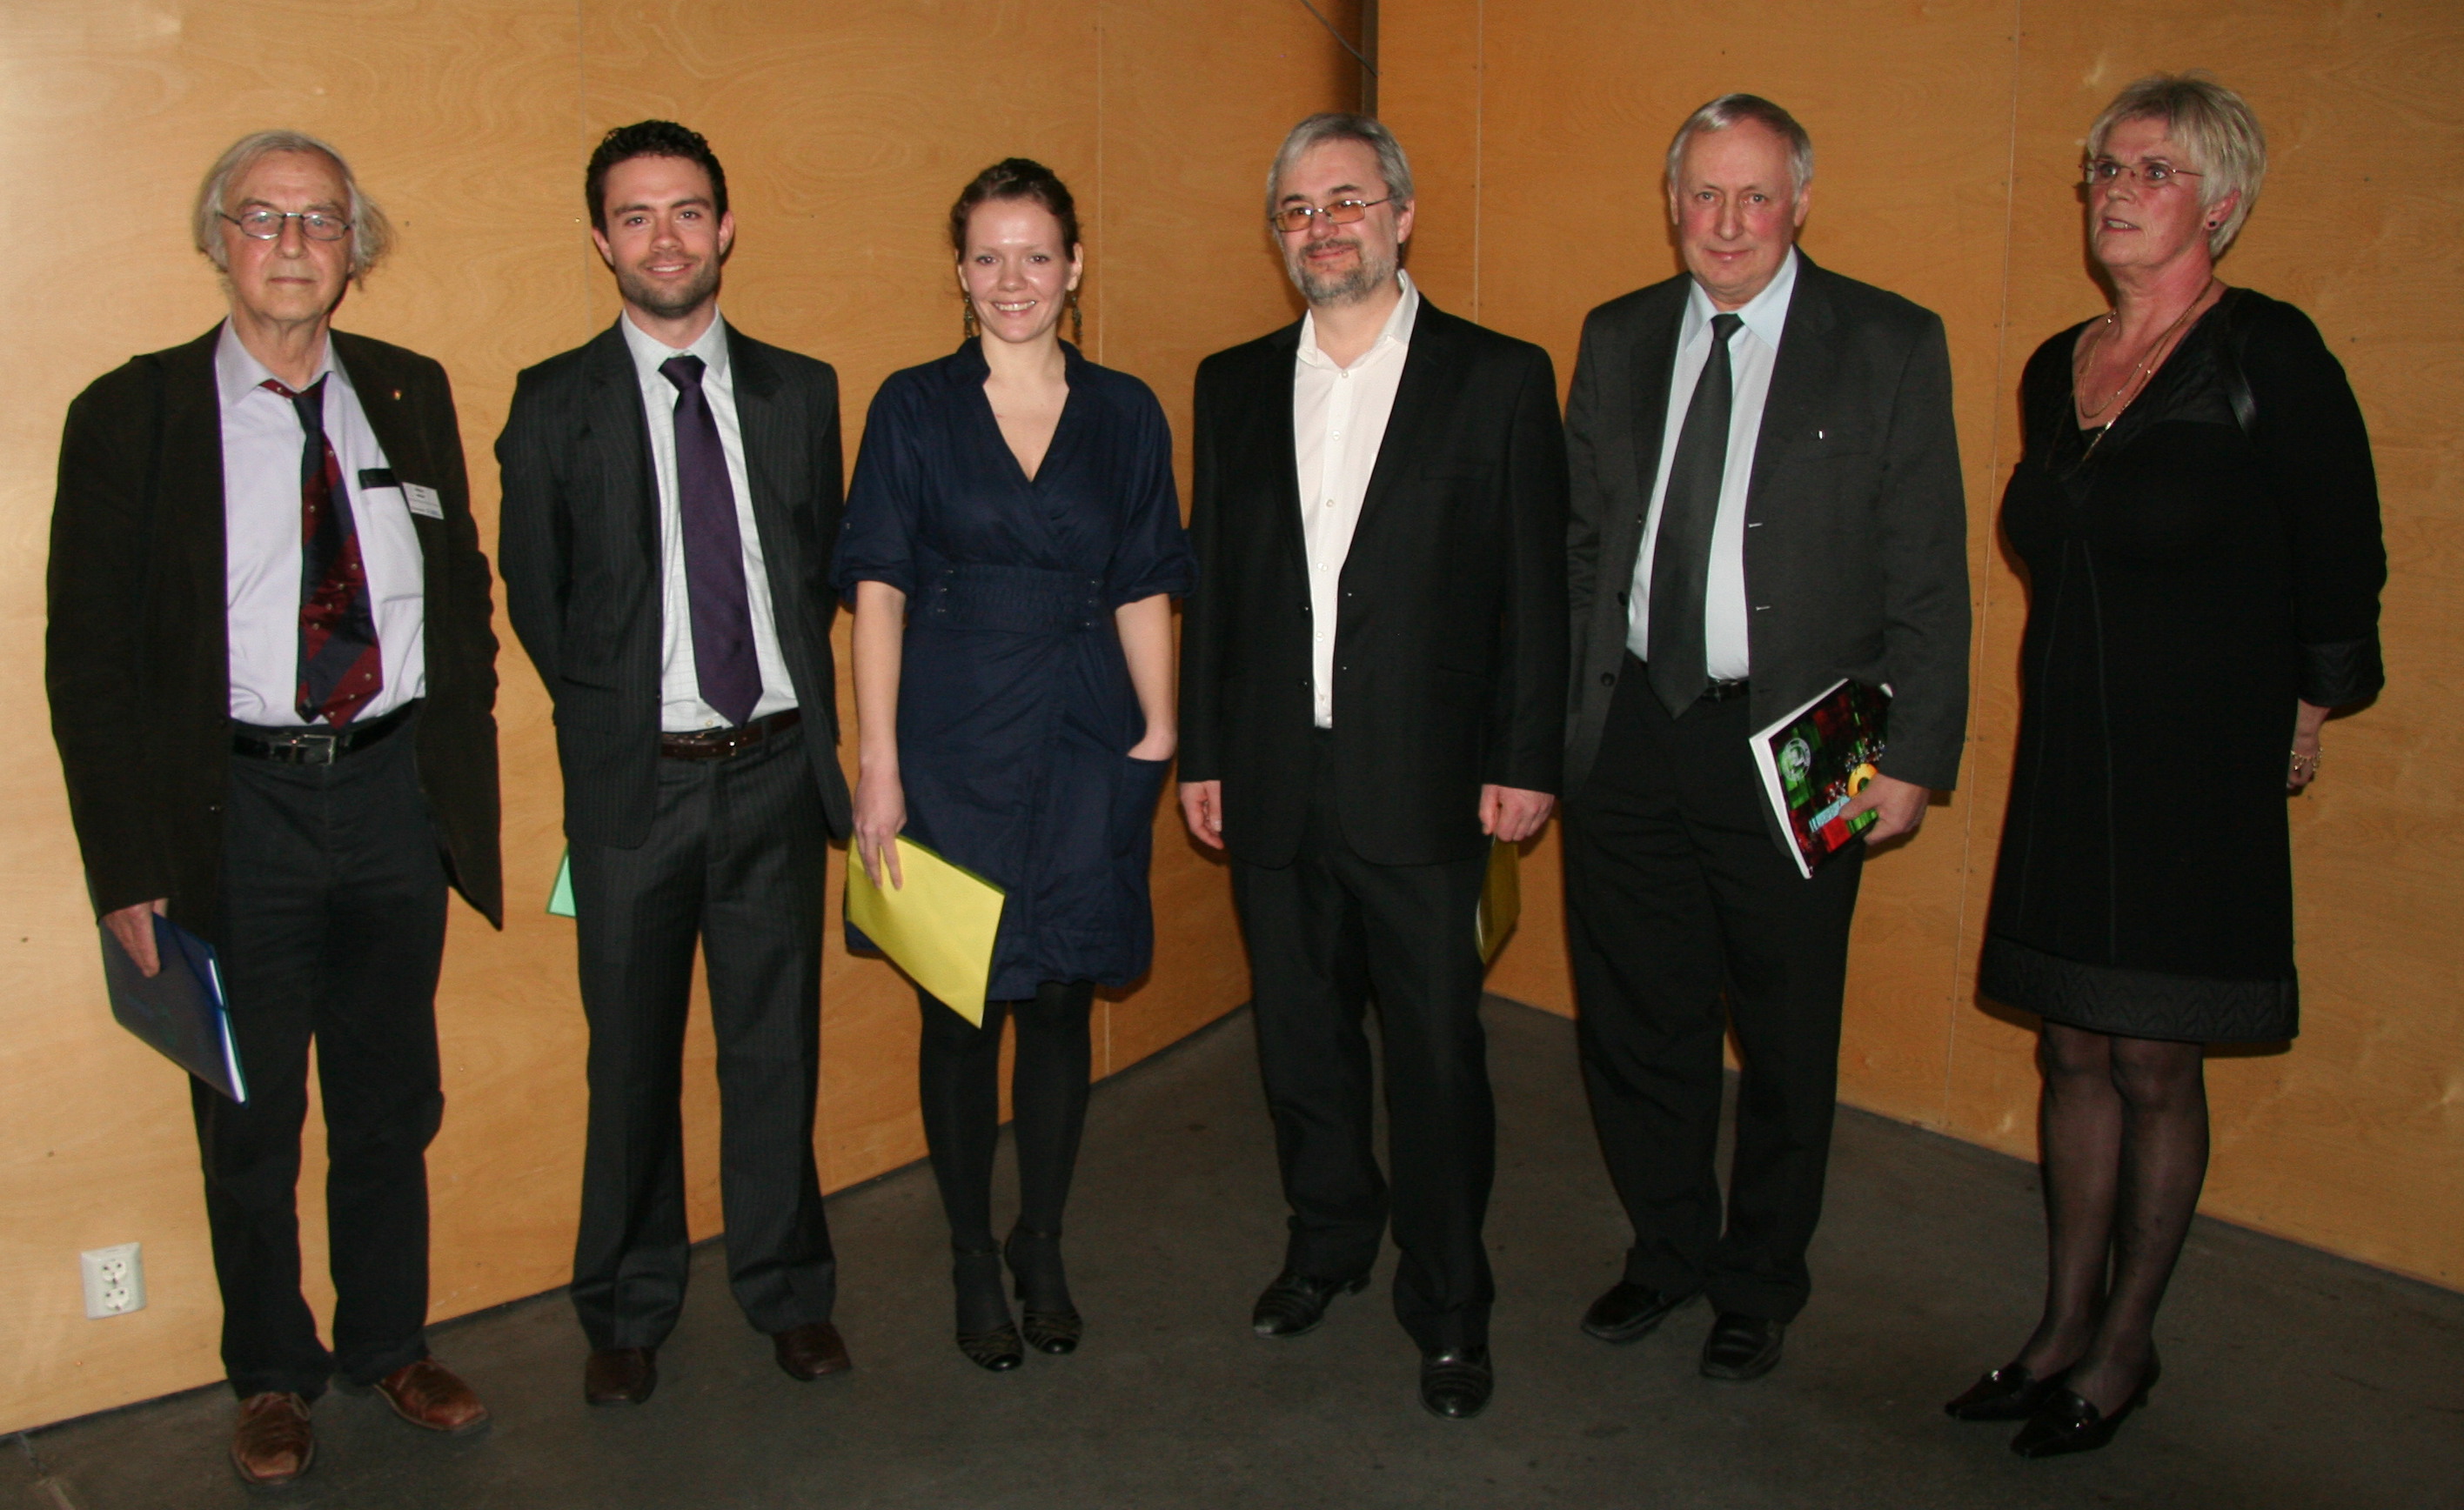 The happy poster prize winnter Ingrid Roxrud (no. 3 from left) flanked by the 2nd and 3rd prize winners and the members of the poster prize committee. Nobel laureate Robert Huber is no. 1 from left. Photographer: Rahmi Lale. (click to enlarge image)